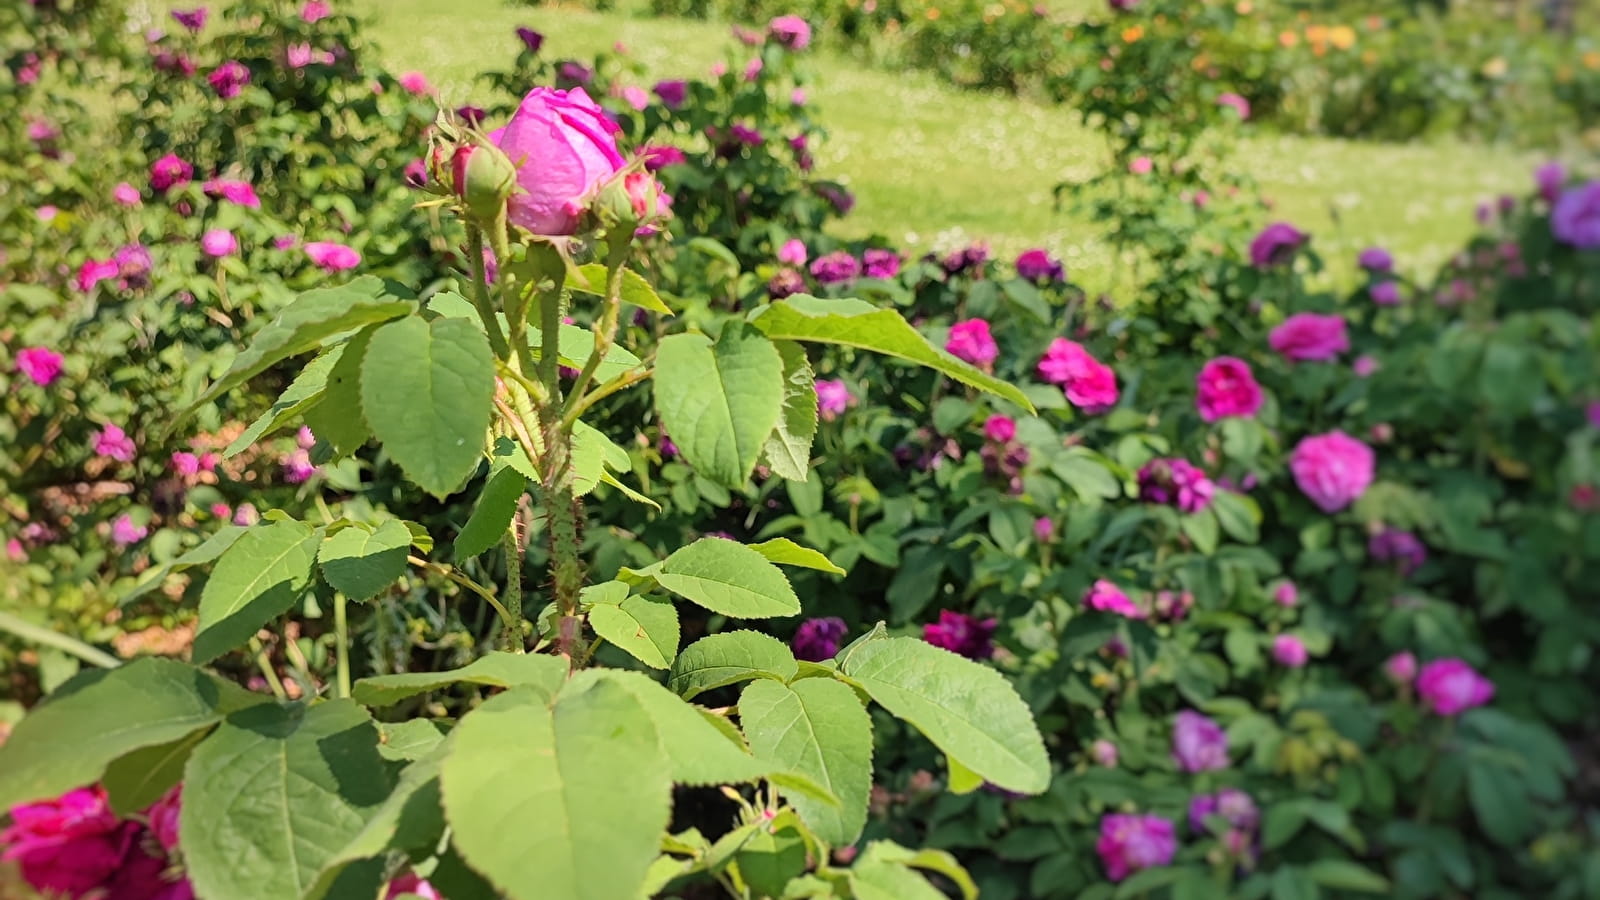 Guided tour: Roses in the Jardin Saint-Hugues